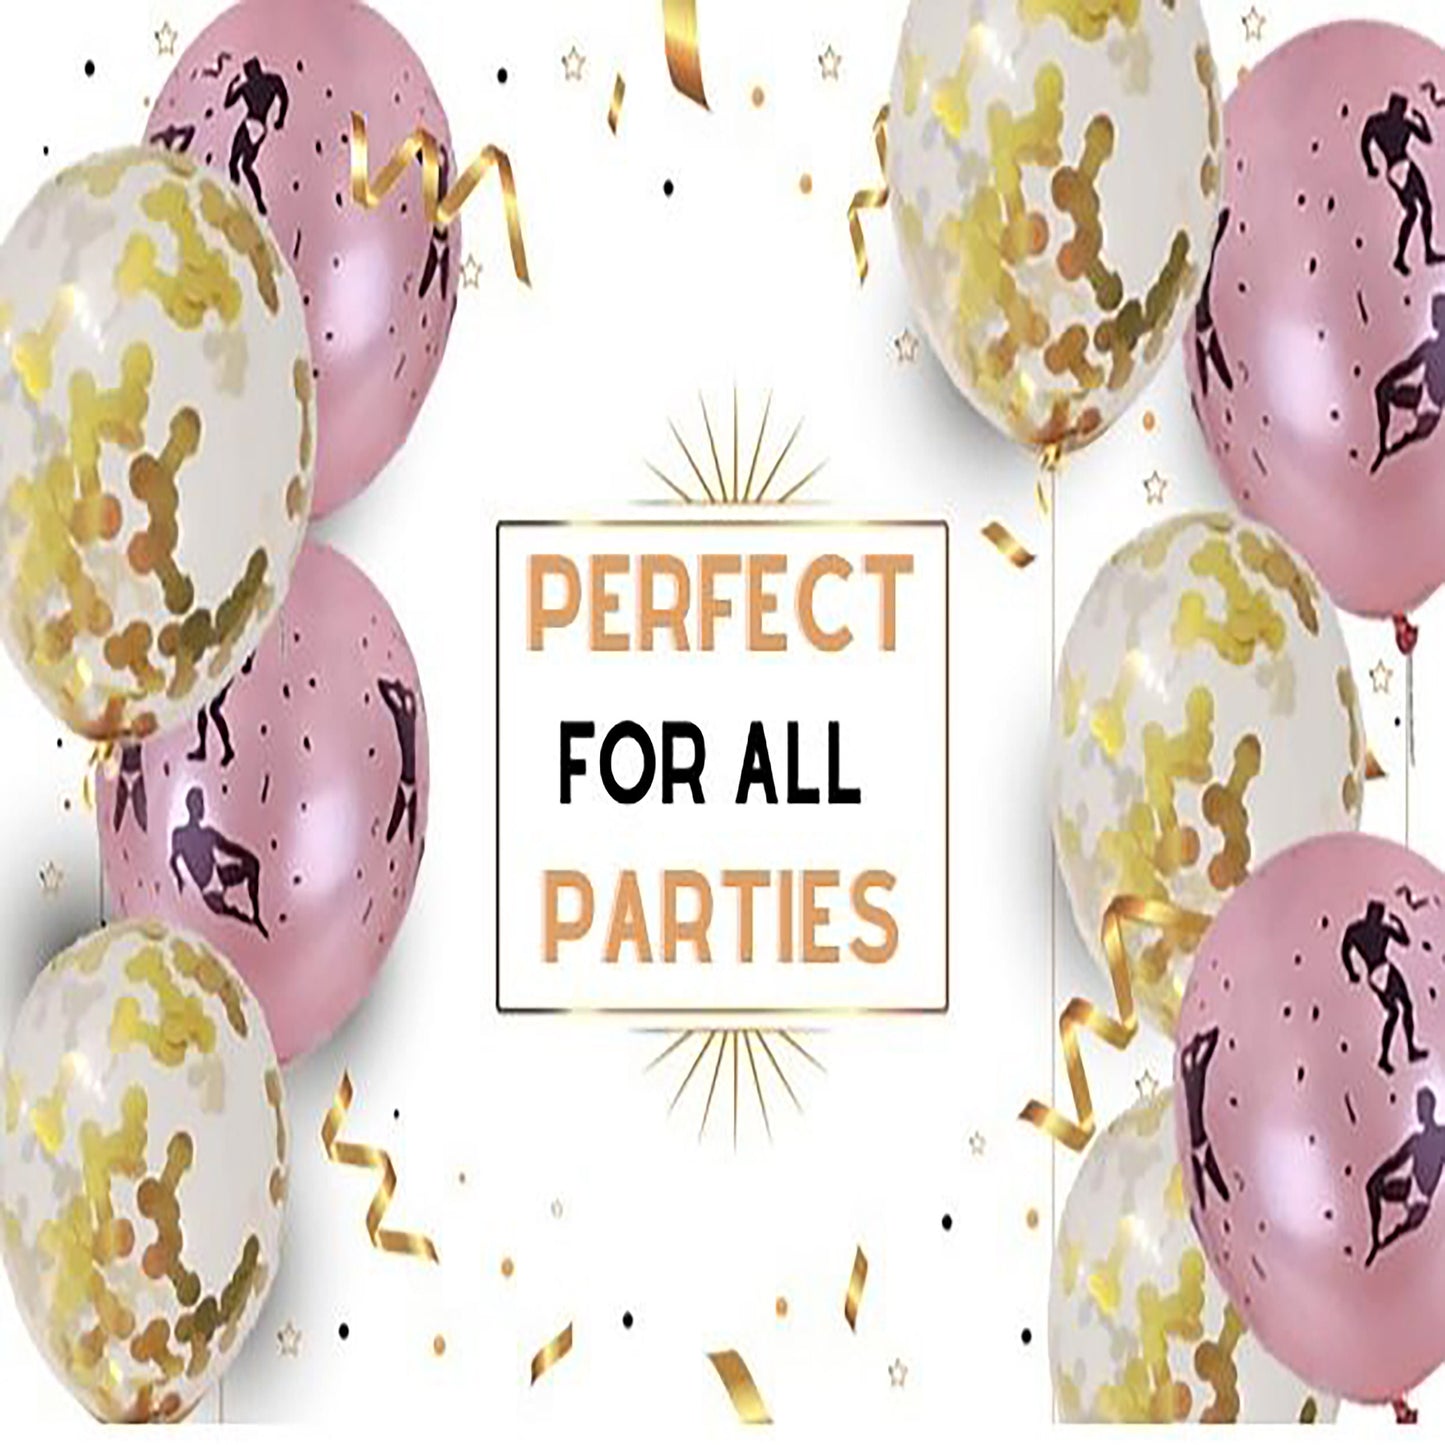 36 Bachelorette Balloons | Bridal Shower Supplies | Dirty | Girls Night Out Gag Gift Funny Stripper Man (RoseGold)